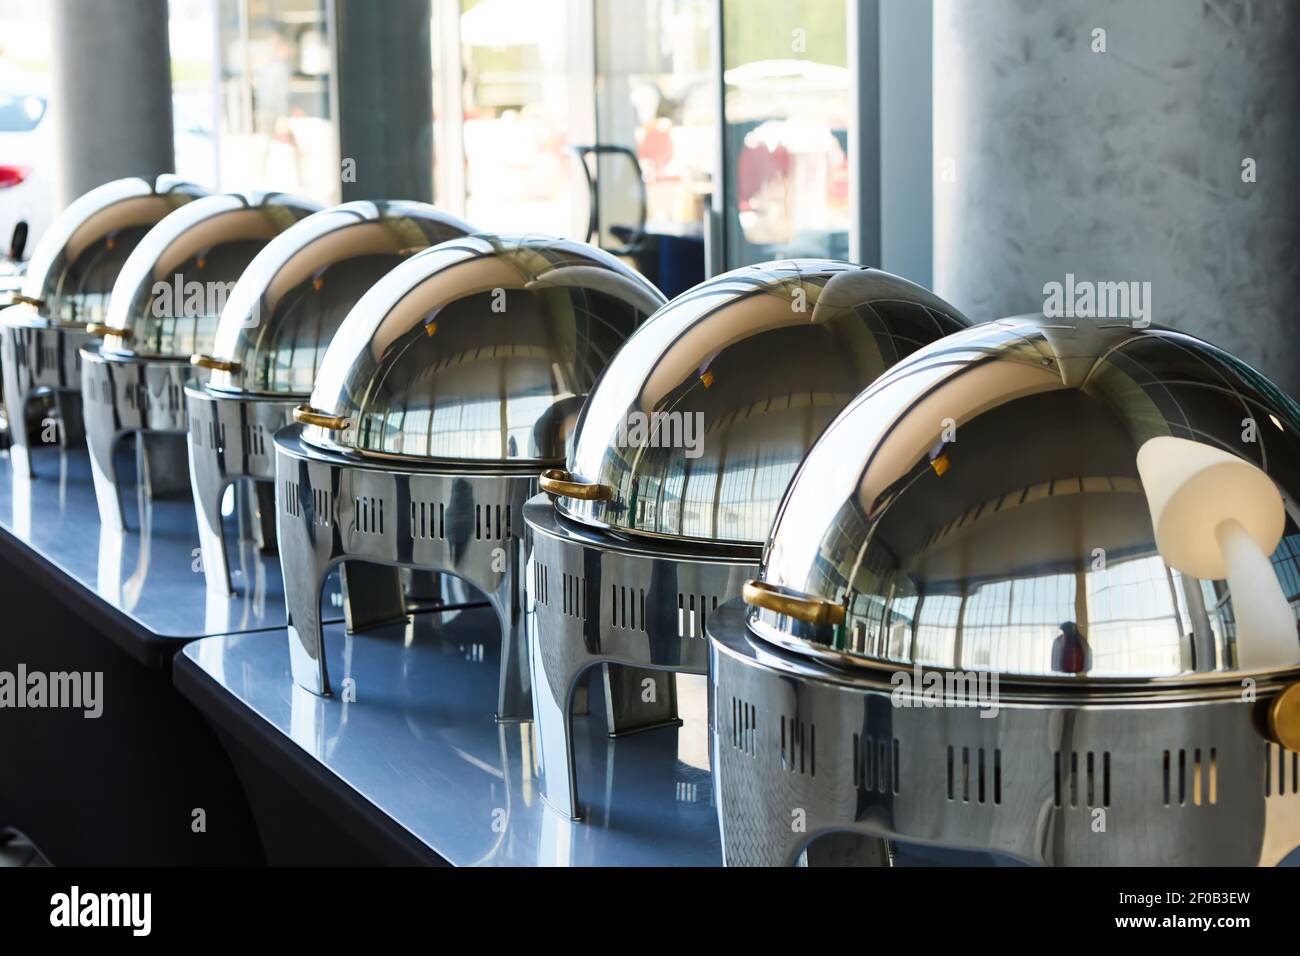 Buffet Table with Row of Food Service Steam Pans Stock Photo